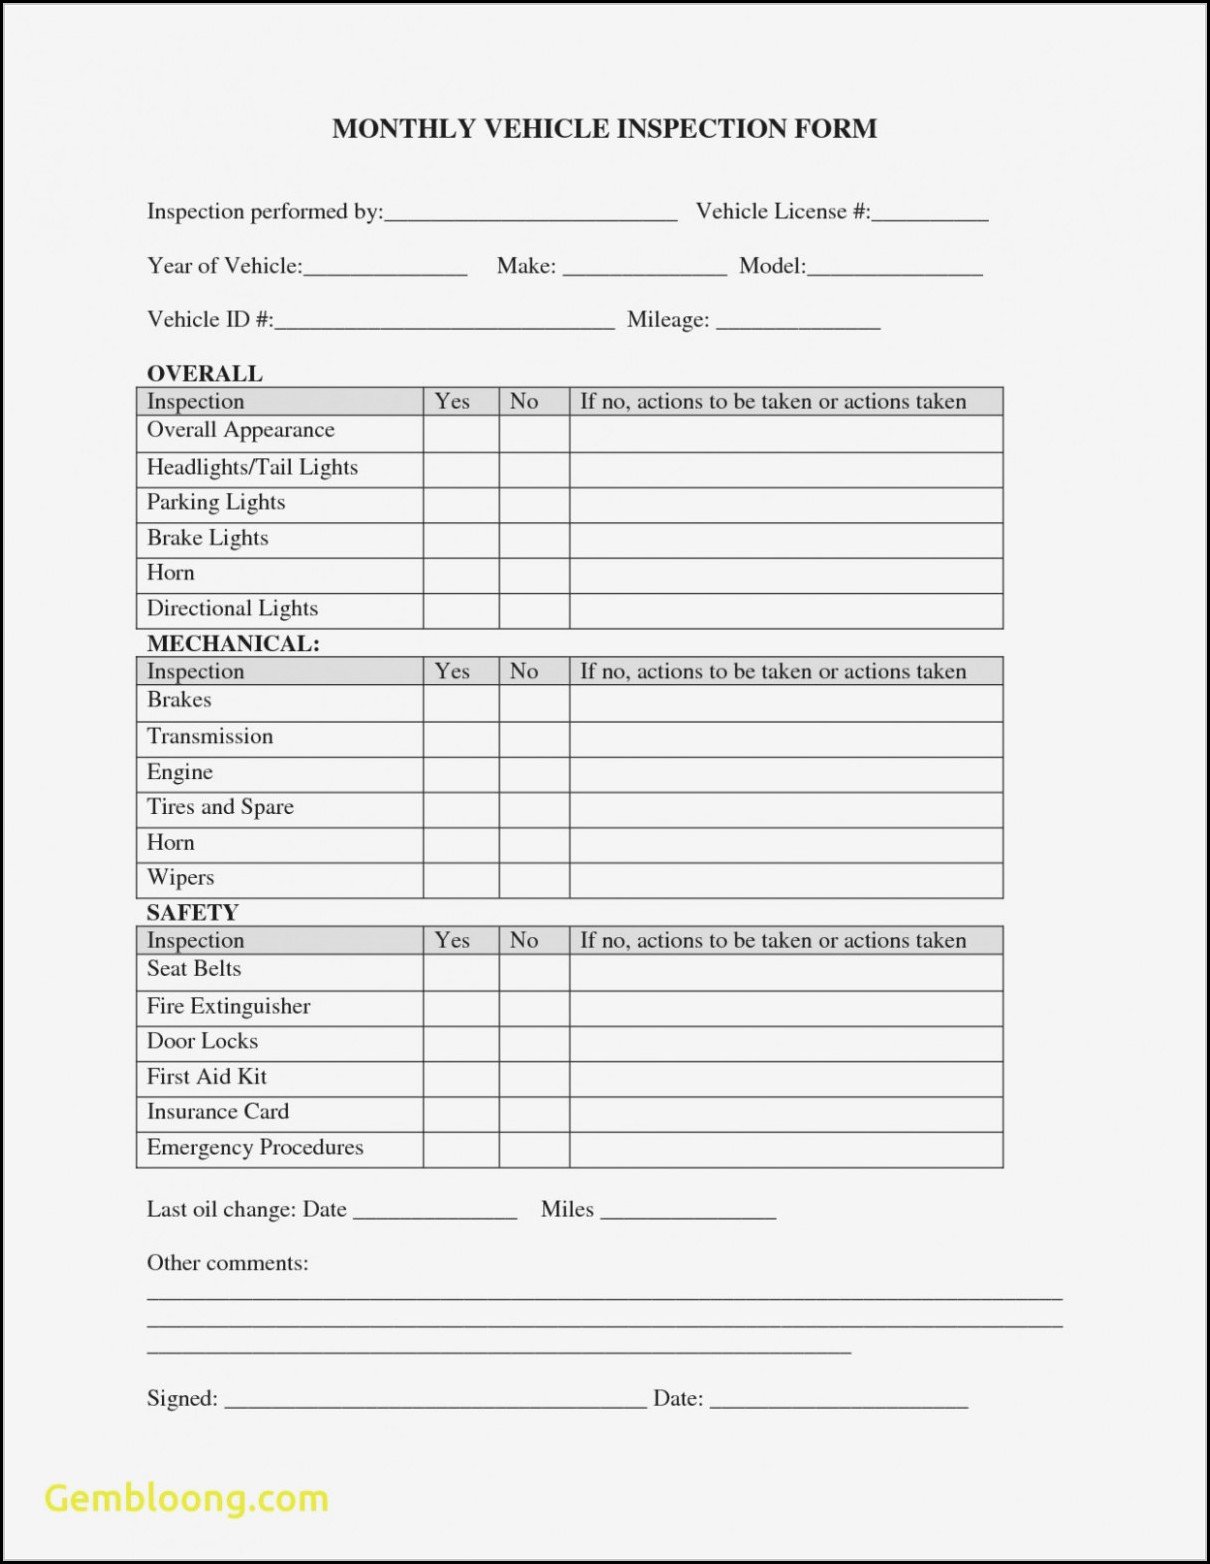 Daily Vehicle Inspection form Template Awesome Daily Vehicle Inspection form Template form Resume